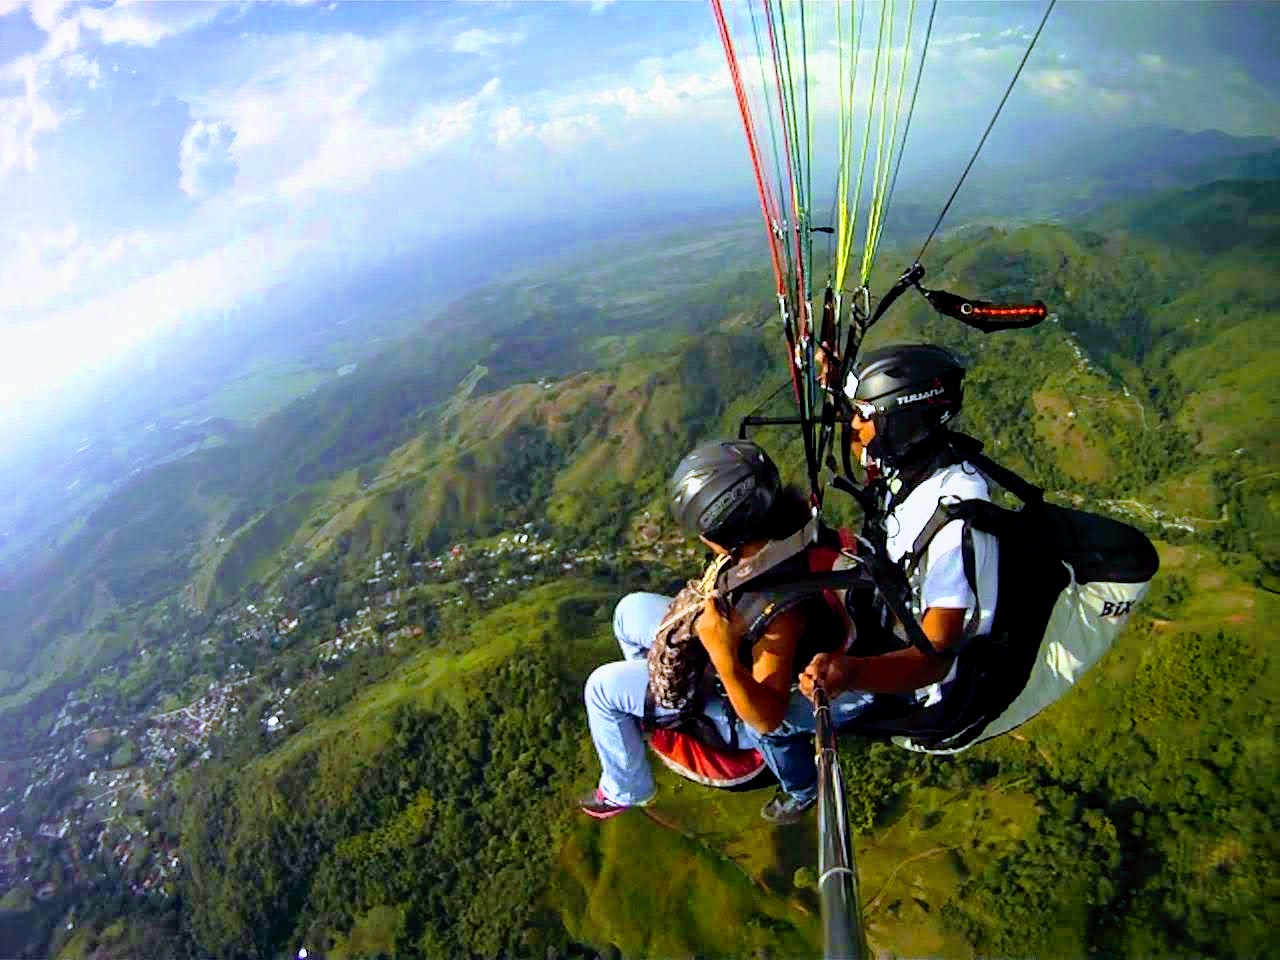 Paragliding in Palmira, Colombia